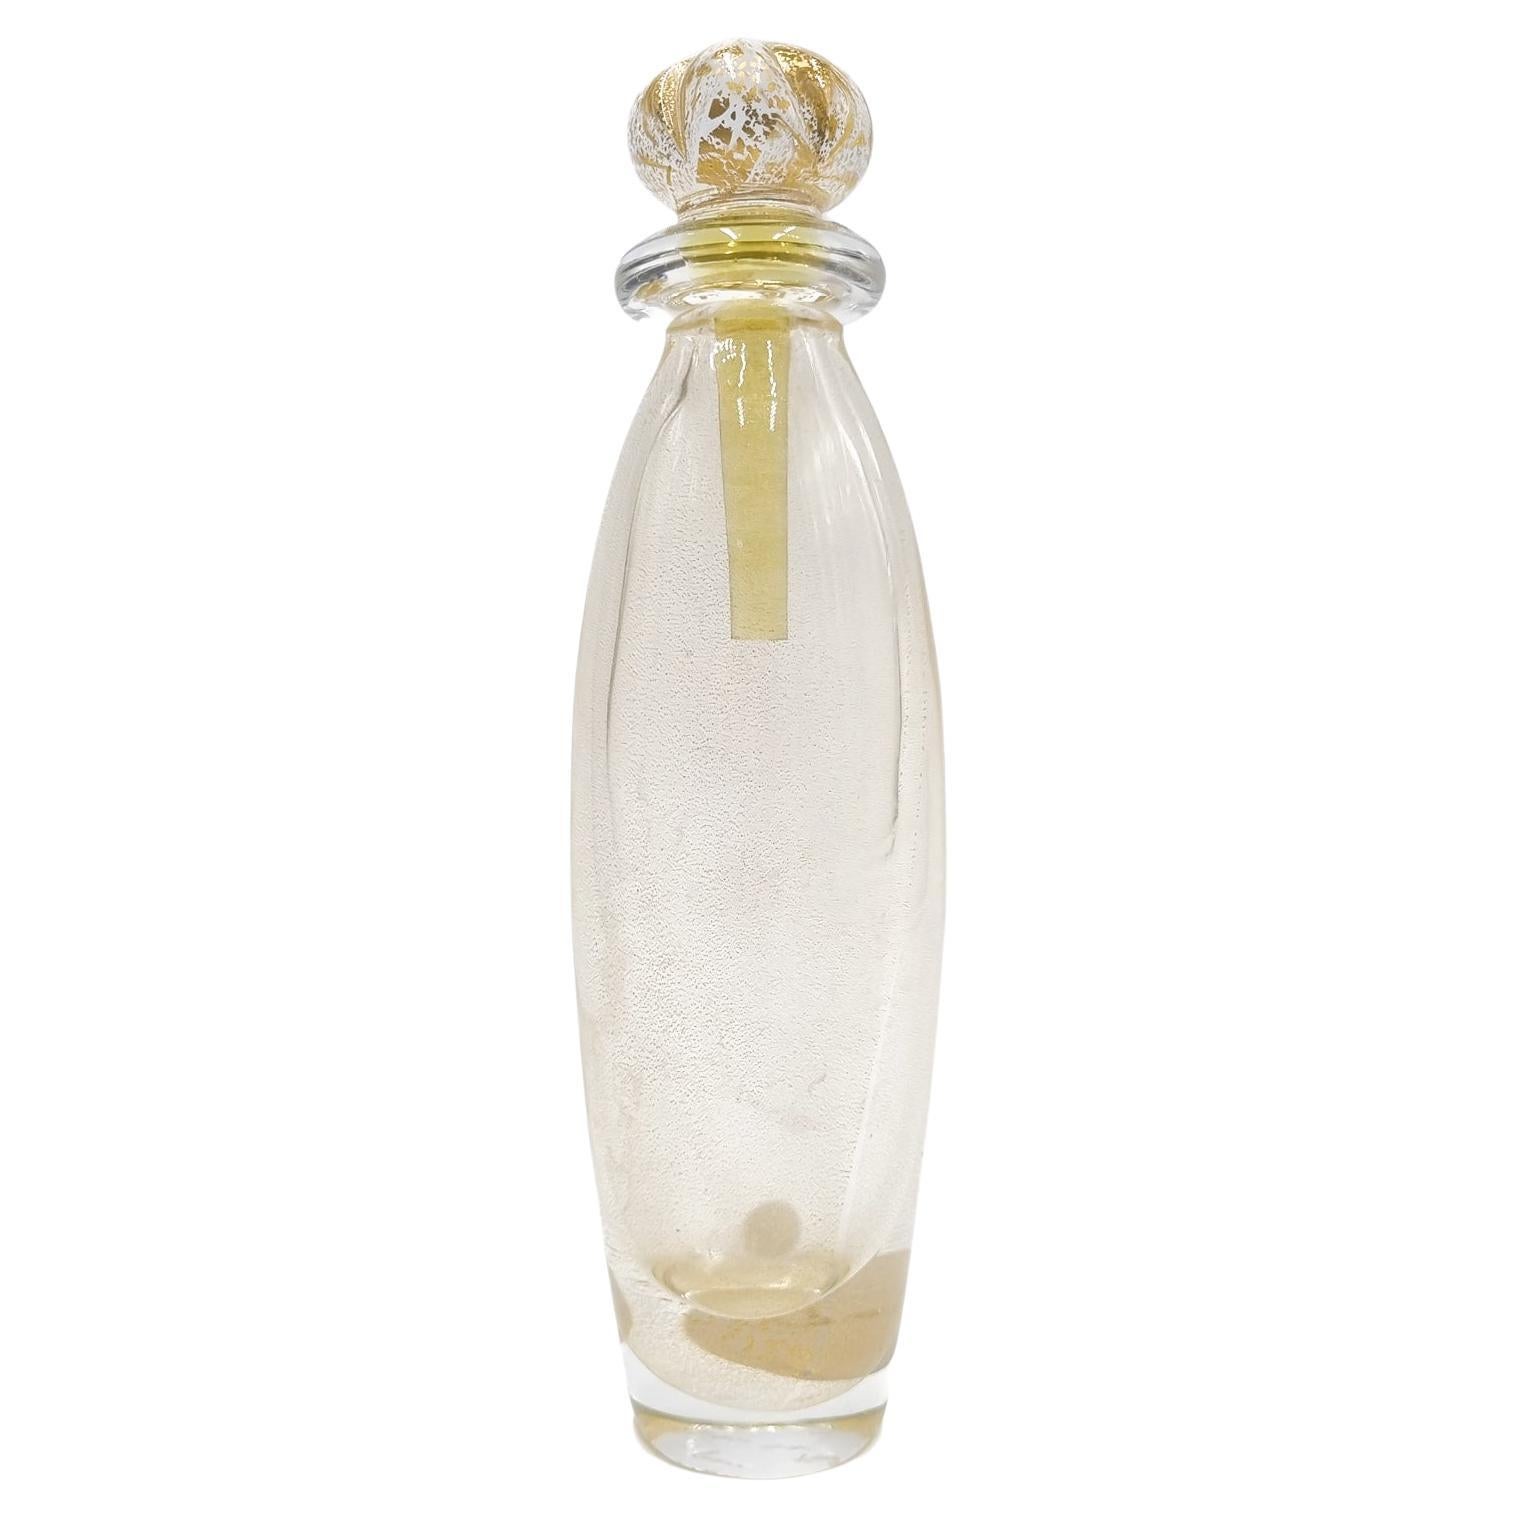 Golden Murano Glass Bottle by Carlo Moretti from the 1970s